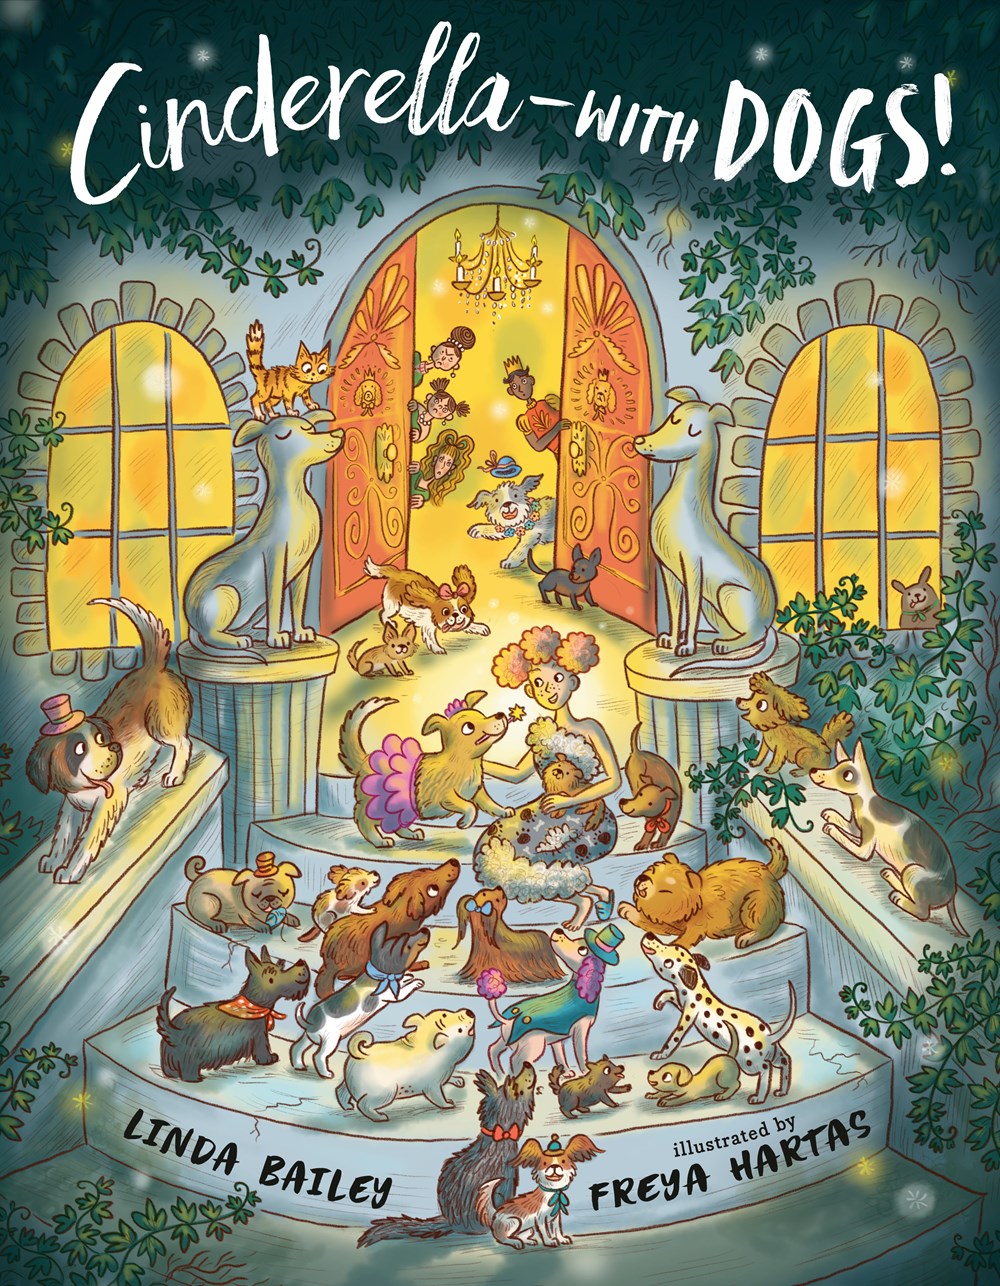 Cinderella--with Dogs! by Linda Bailey